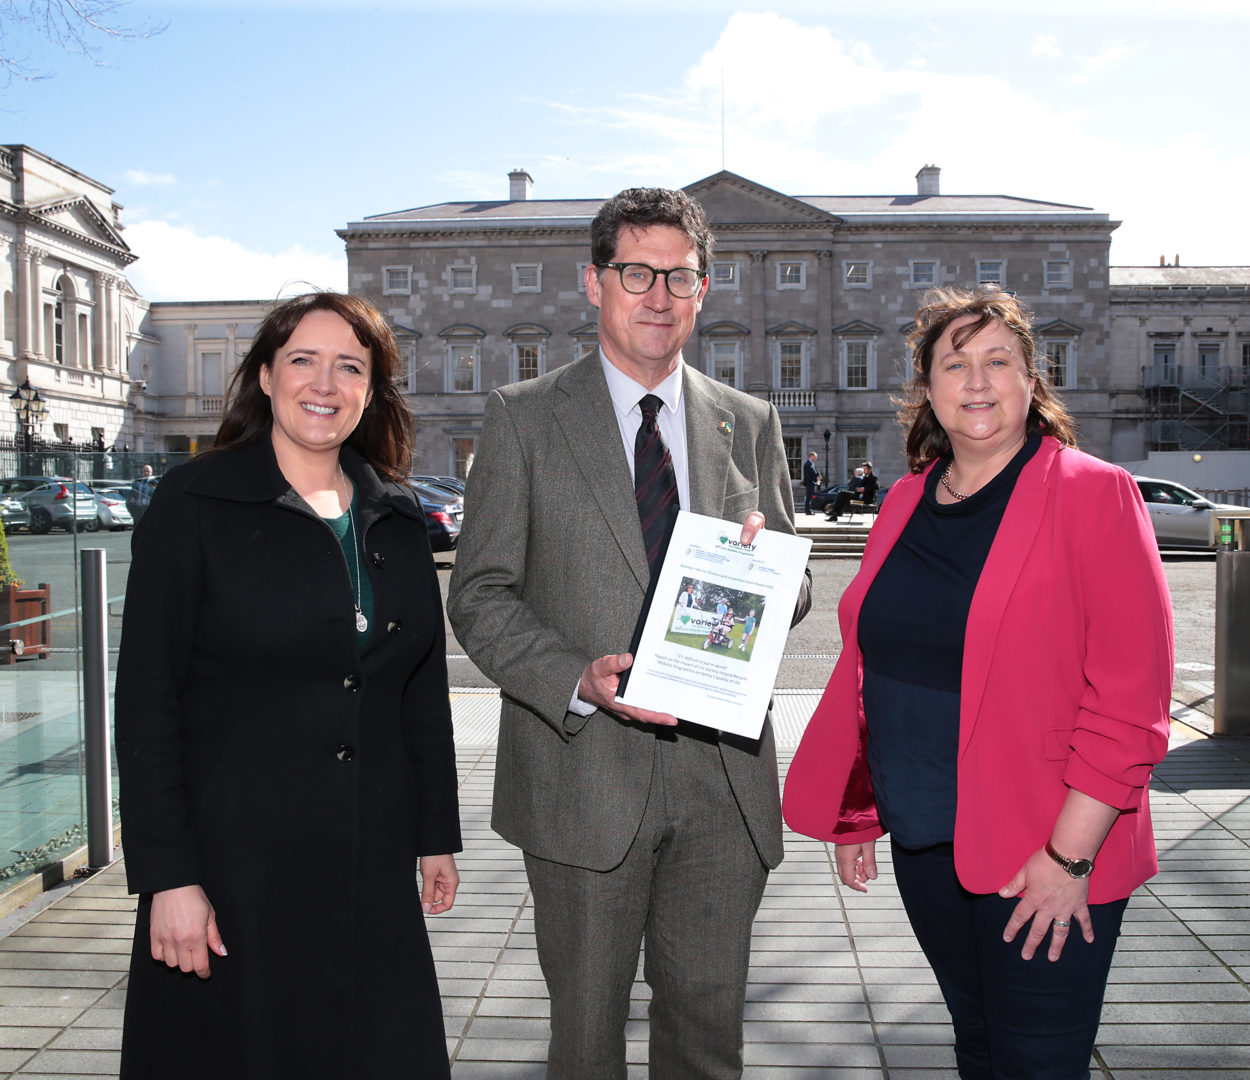 Dr Jolanta Burke from the Royal College of Surgeons Ireland pictured here presenting her report to Minister for Transport Eamon Ryan and Minister of State for Disabilities Anne Rabbitte